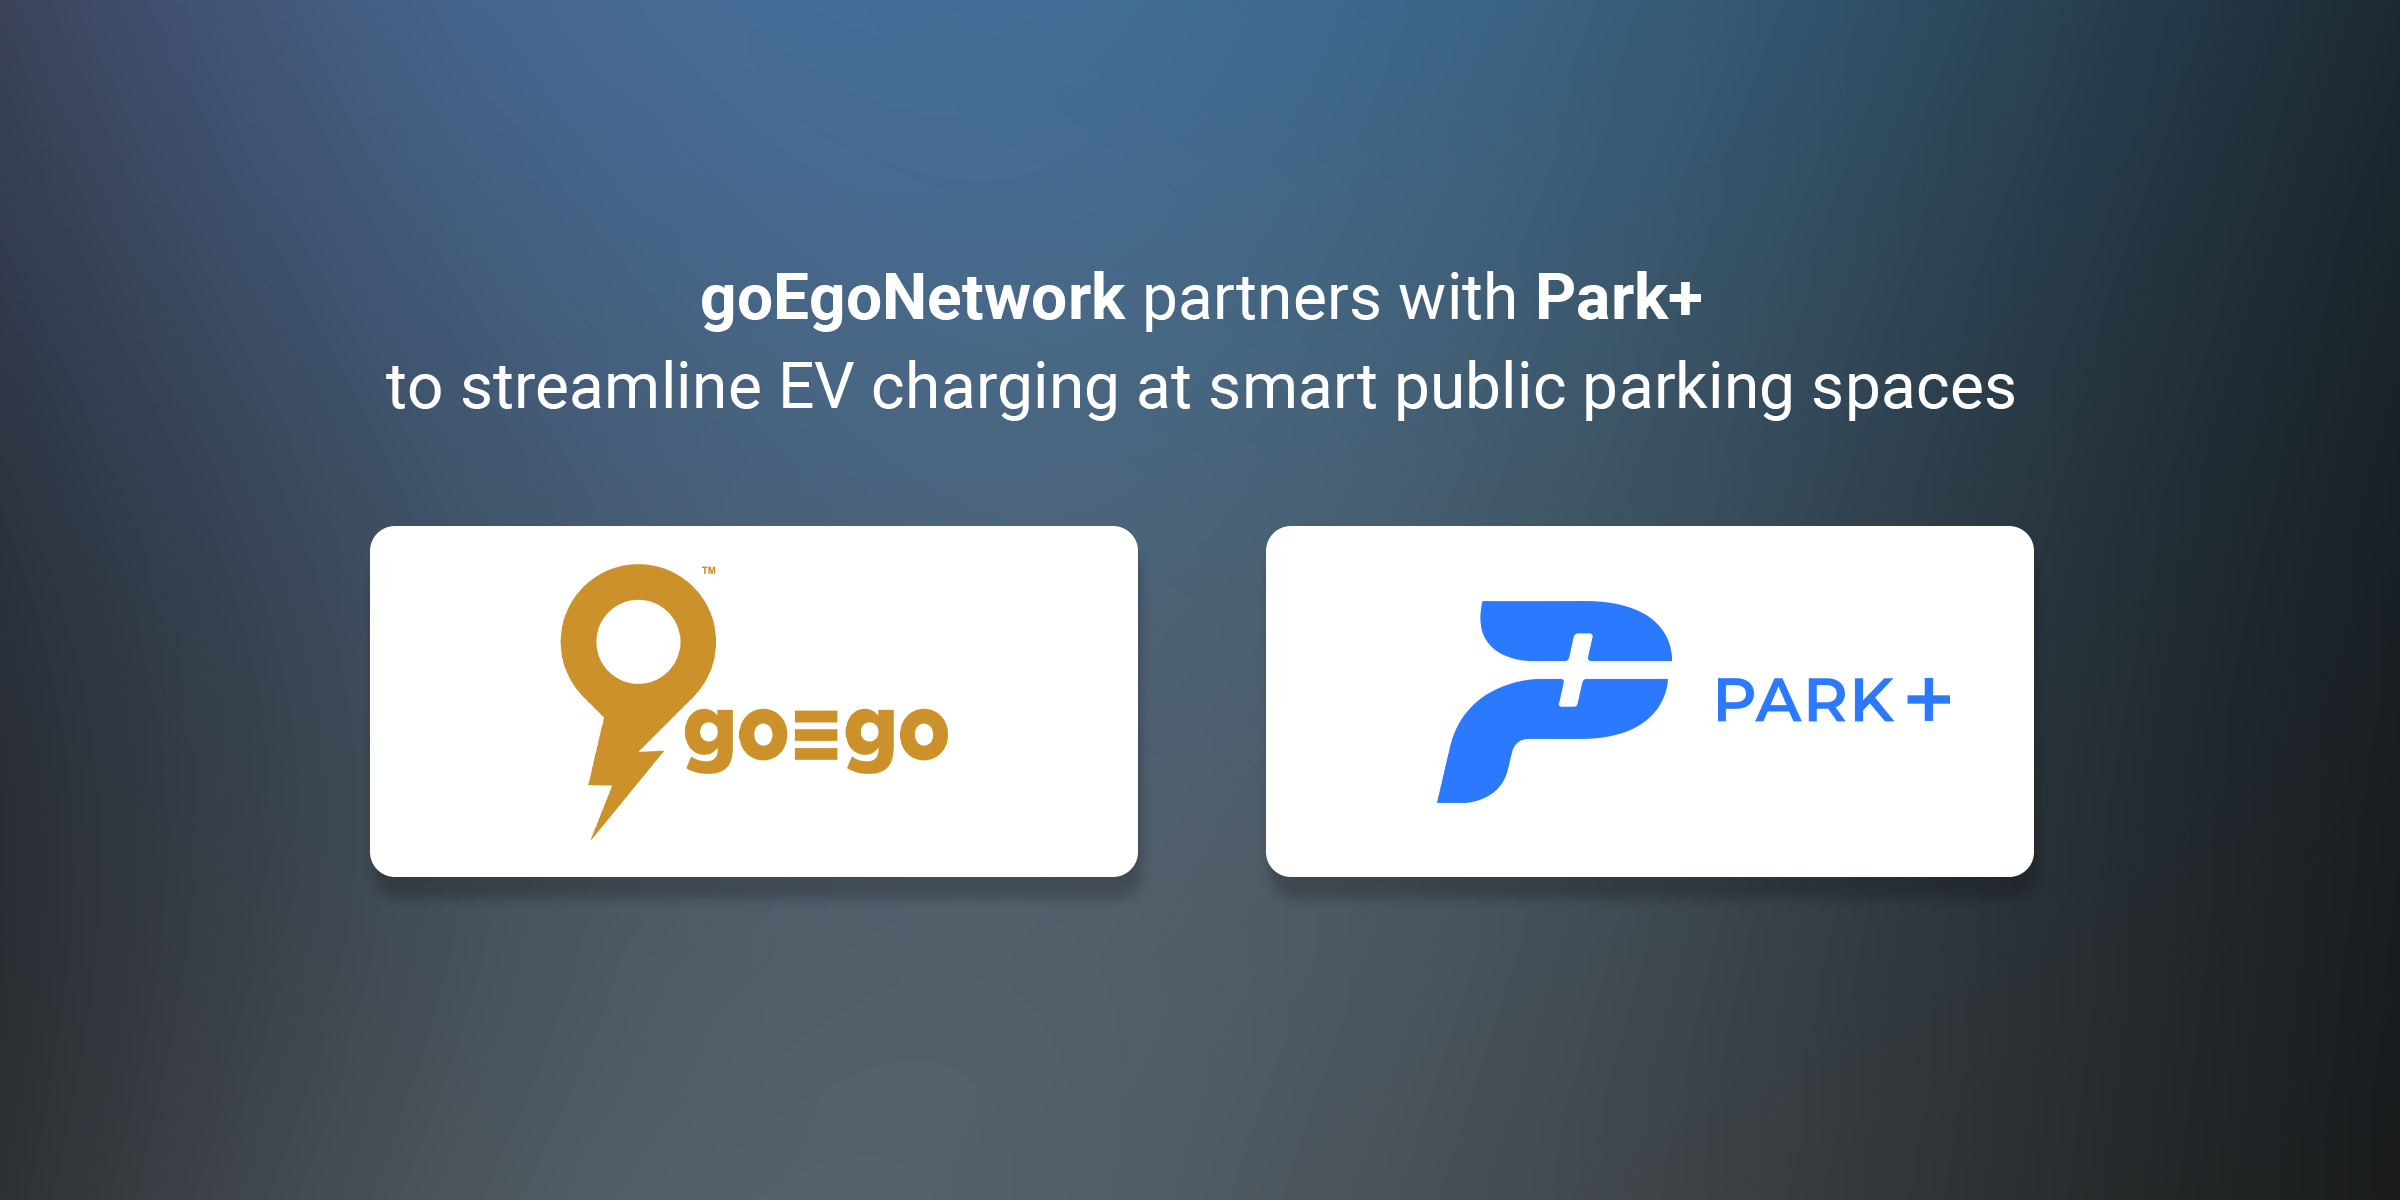 park-and-goegonetwork-tie-up-to-deploy-ev-charging-stations-across-india